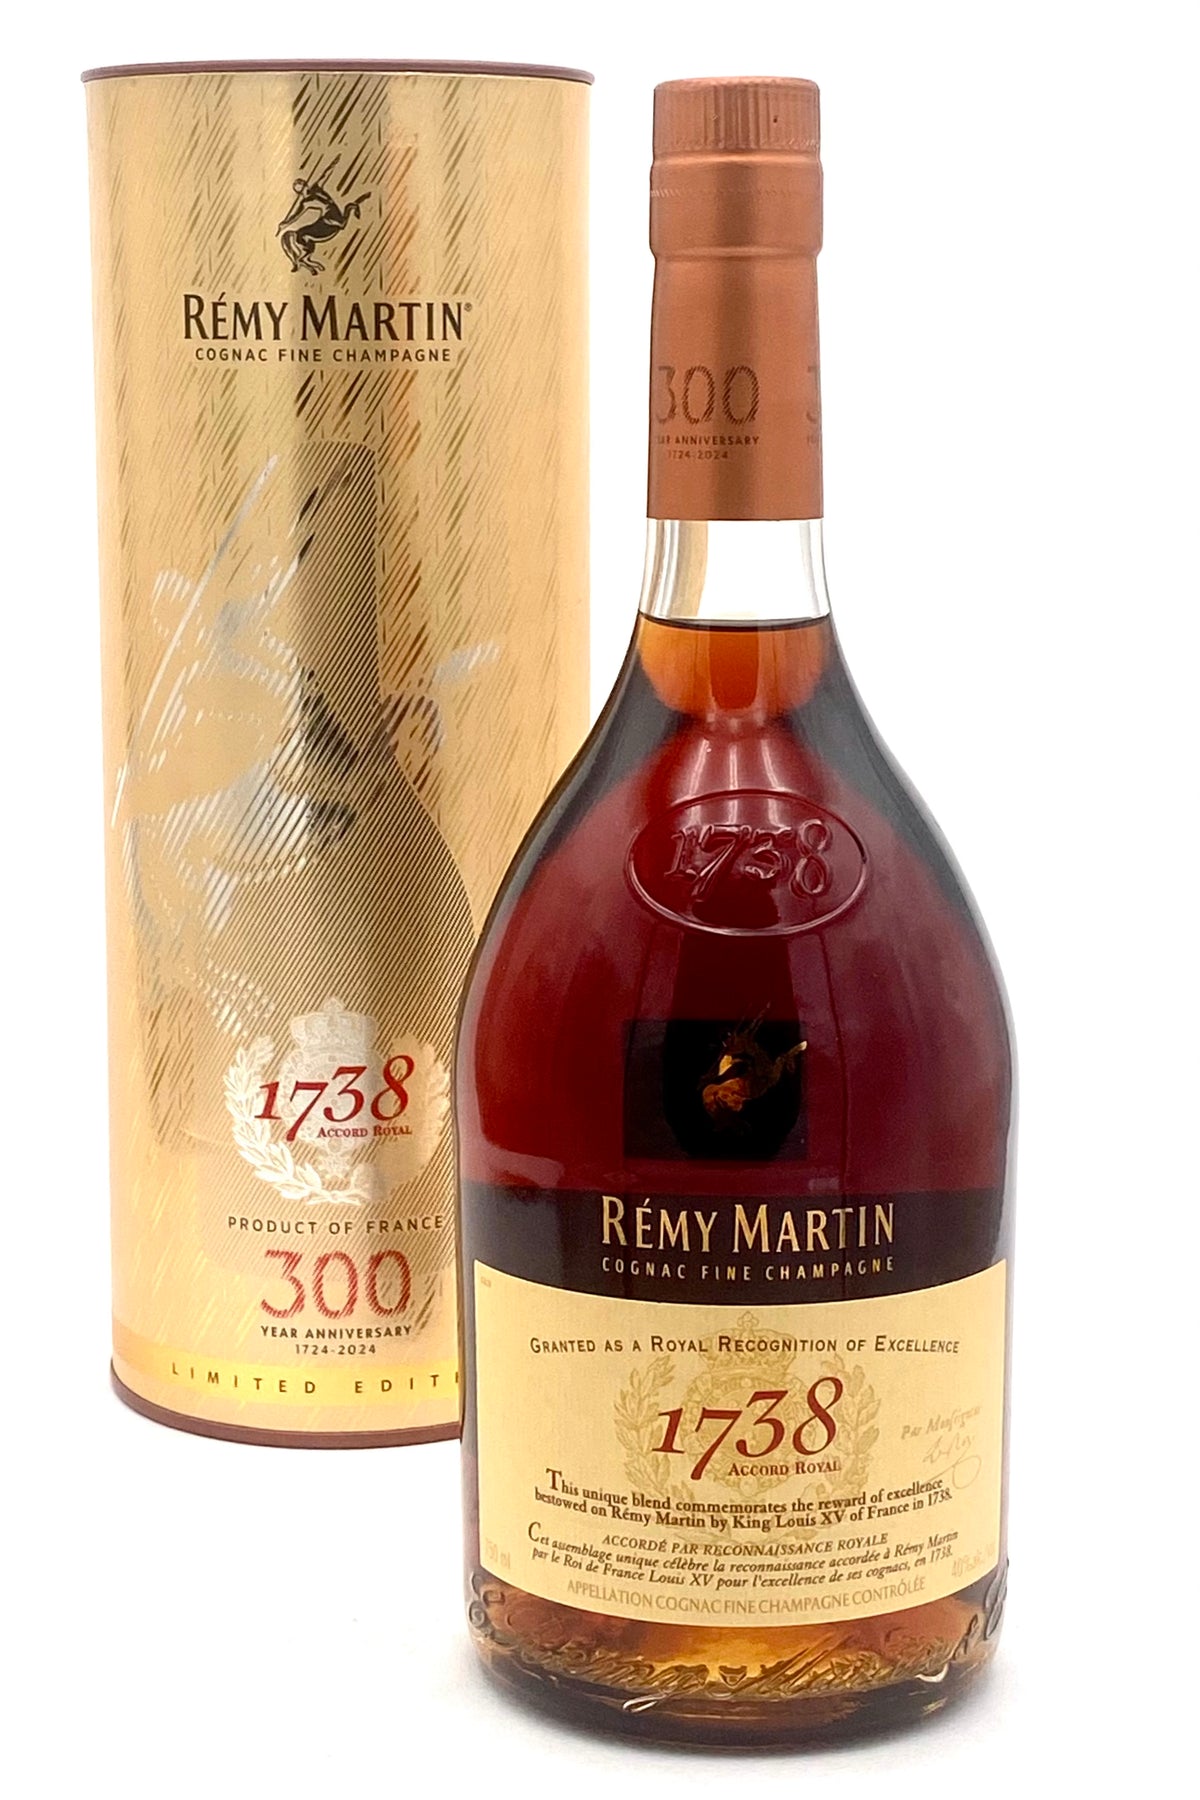 Remy Martin 1738 Accord Royal 300th Year Anniversary Cognac Limited Edition